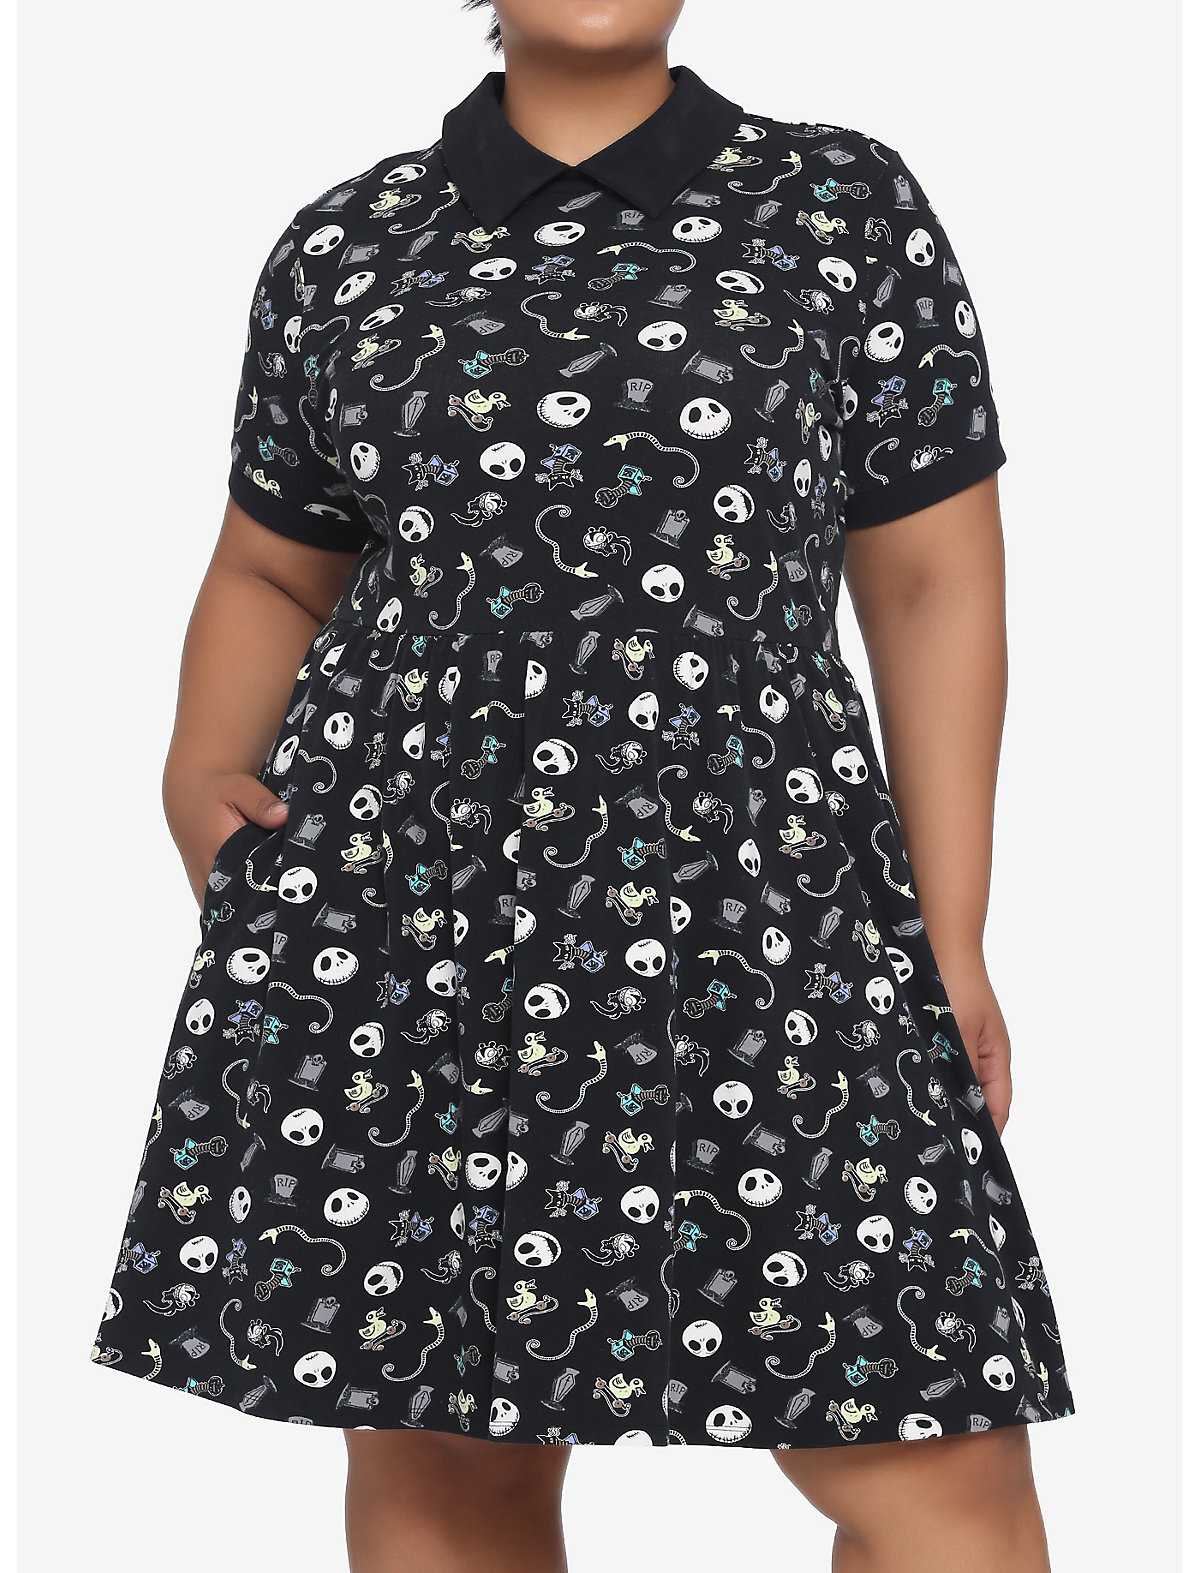 The Nightmare Before Christmas Icons Collar Dress Plus Size